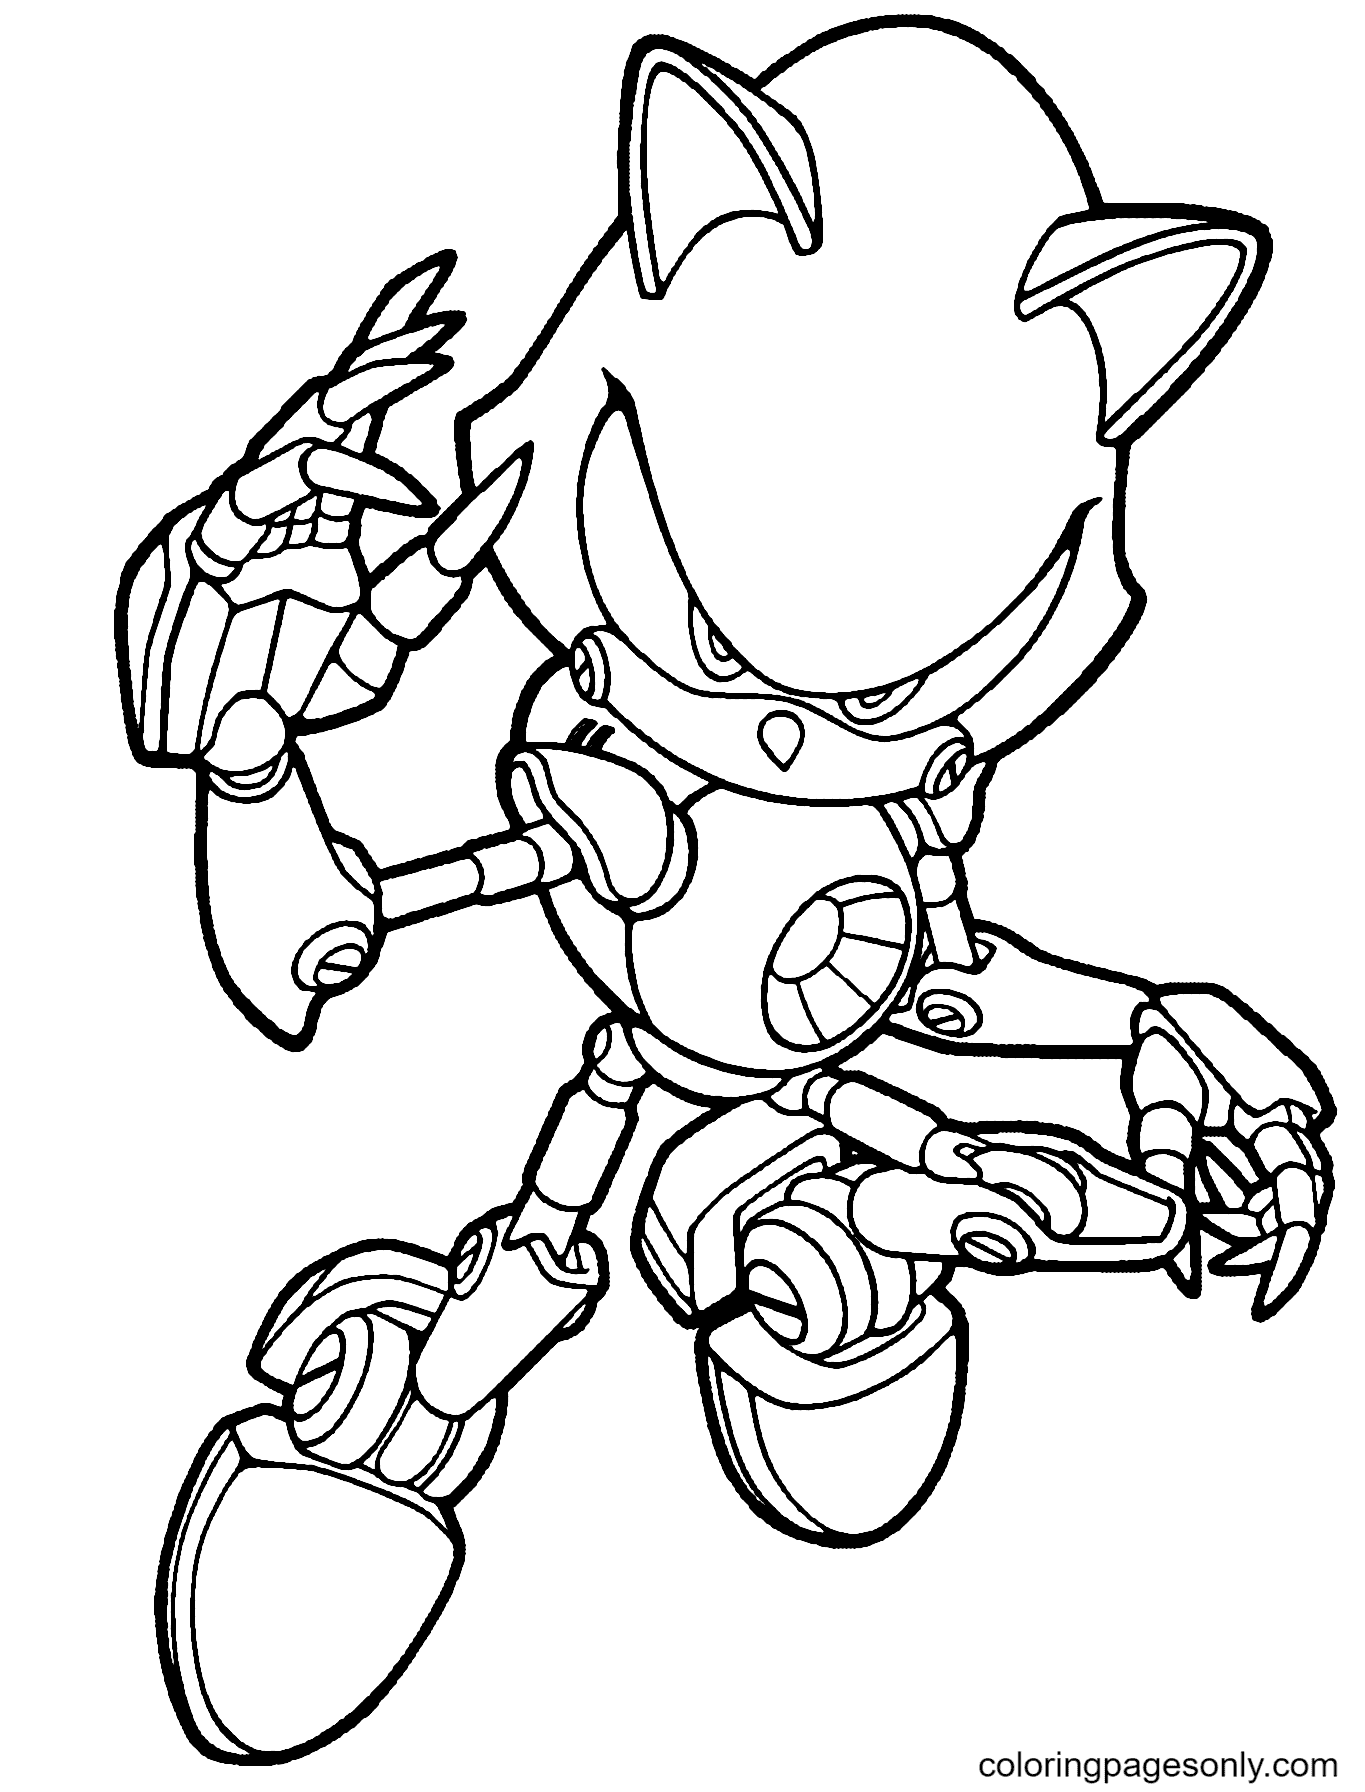 Sonic The Hedgehog Coloring Pages   Coloring Pages For Kids And Adults